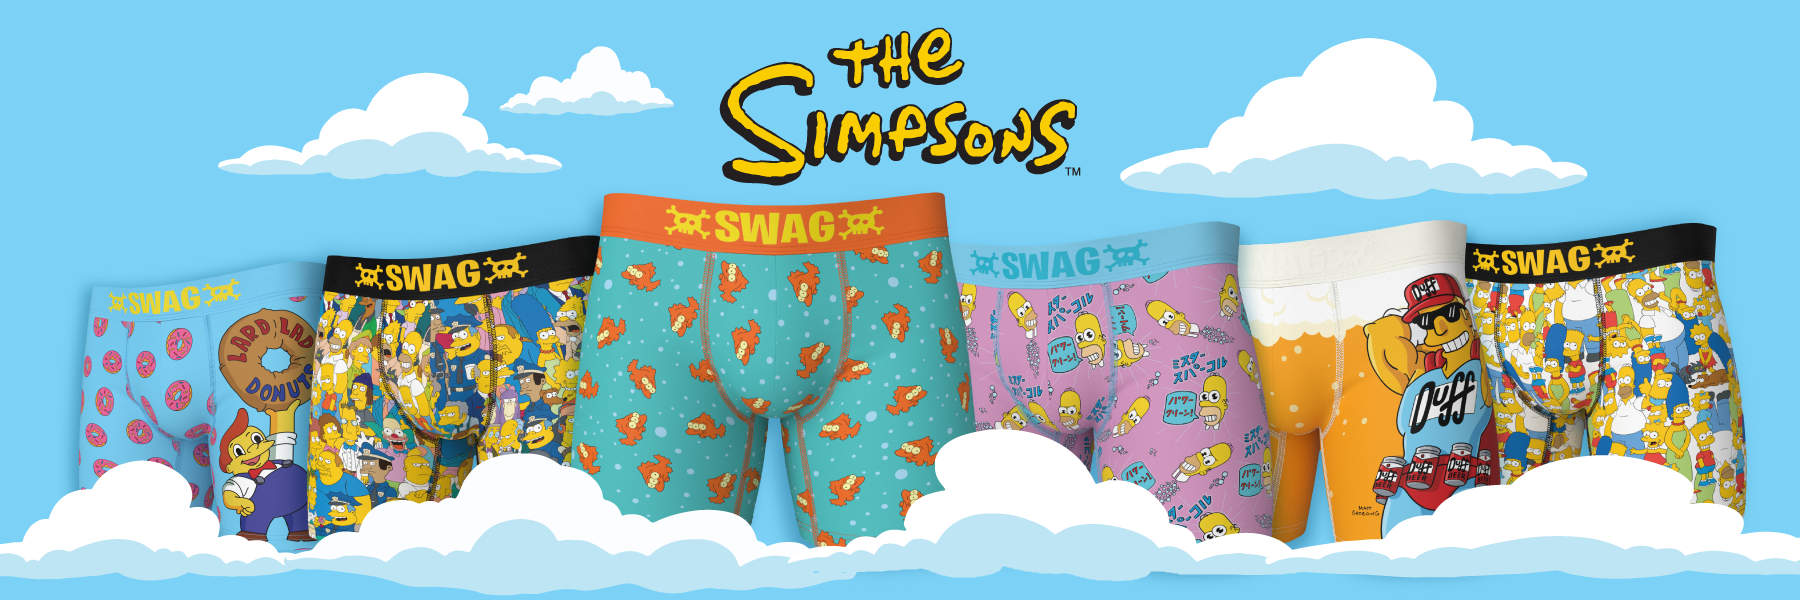 SWAG Simpsons Lard Lad Donuts Pink Frosted Sprinkles Blue Boxers NWT Men's